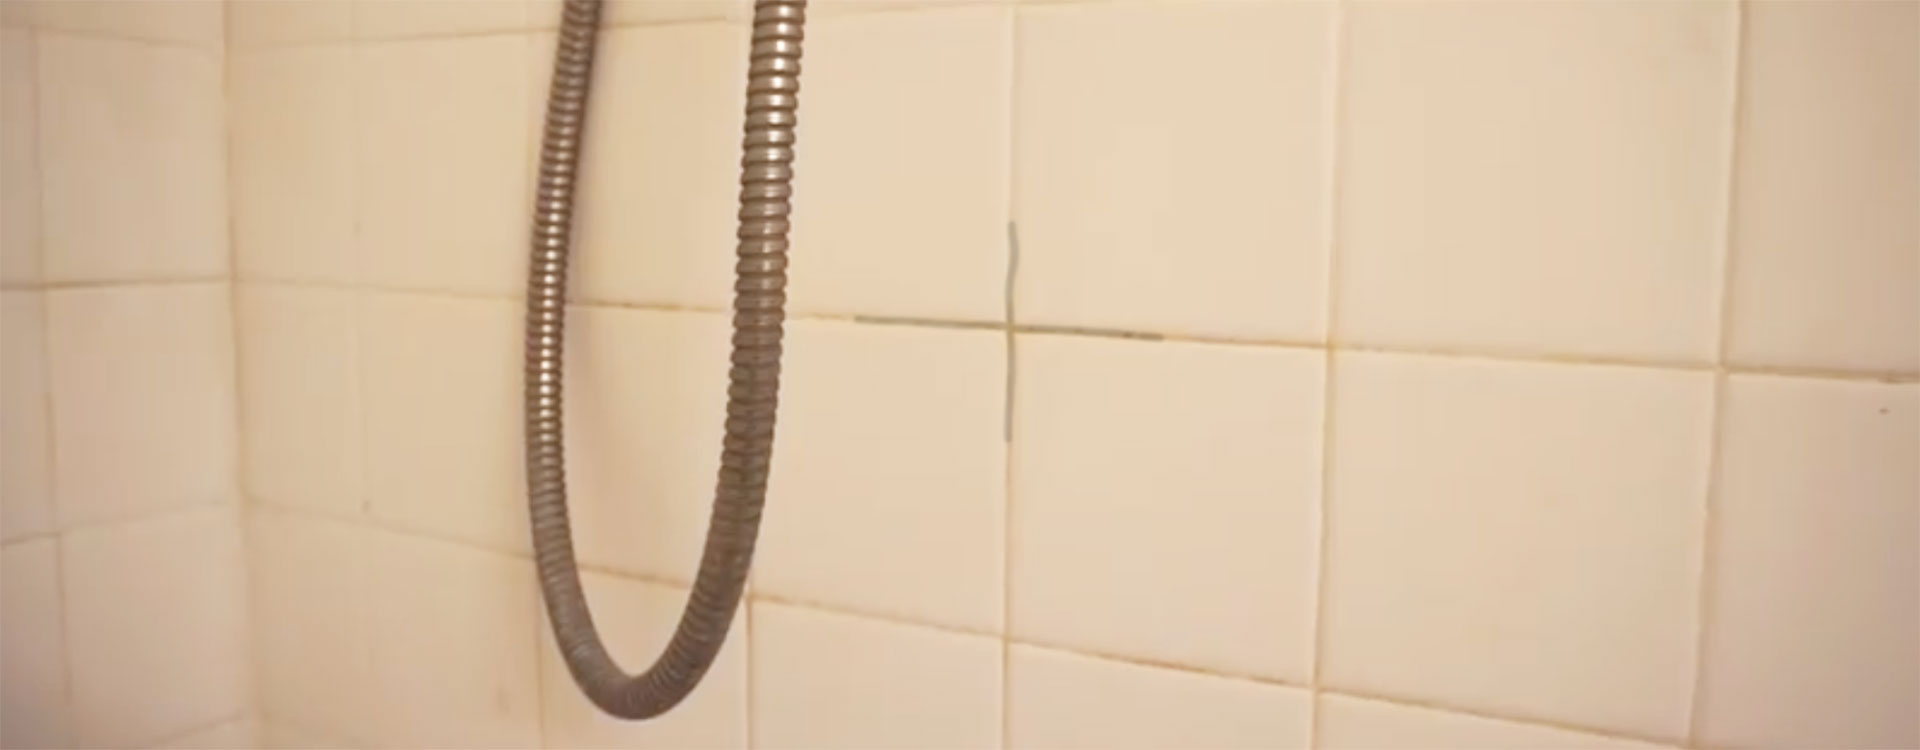 How to Remove Black Mould from Grout